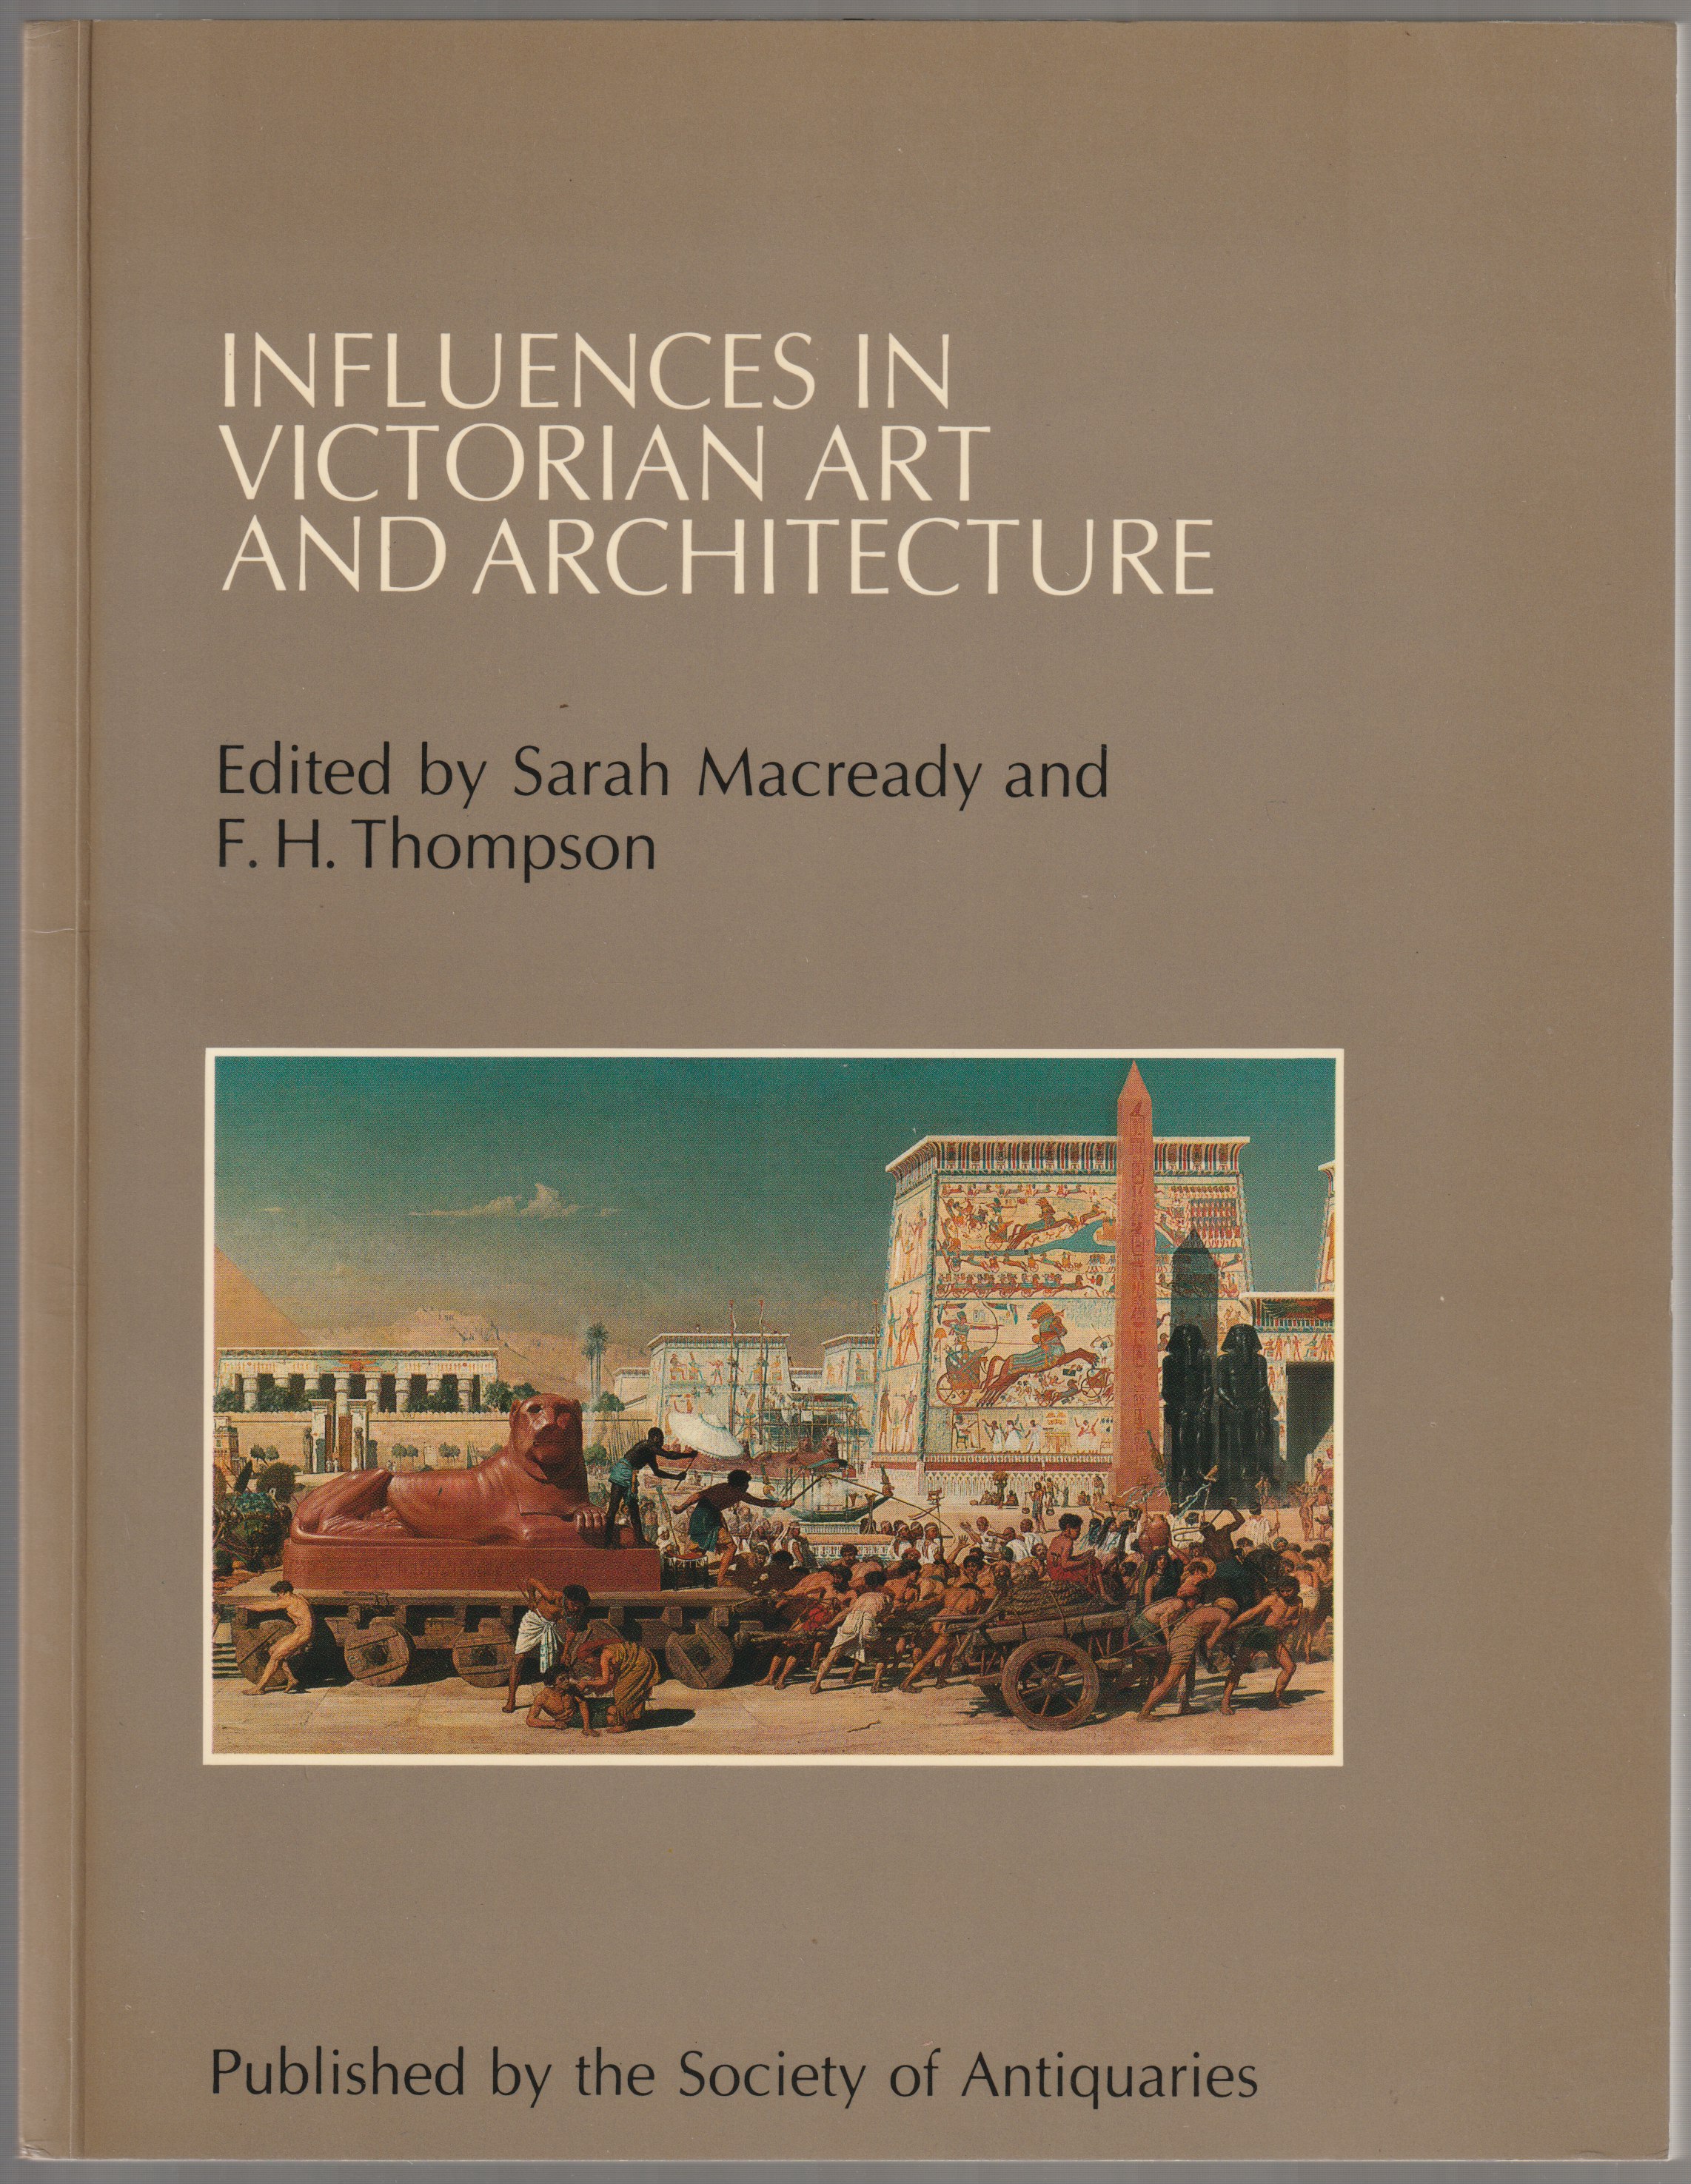 Influences in Victorian art and architecture.